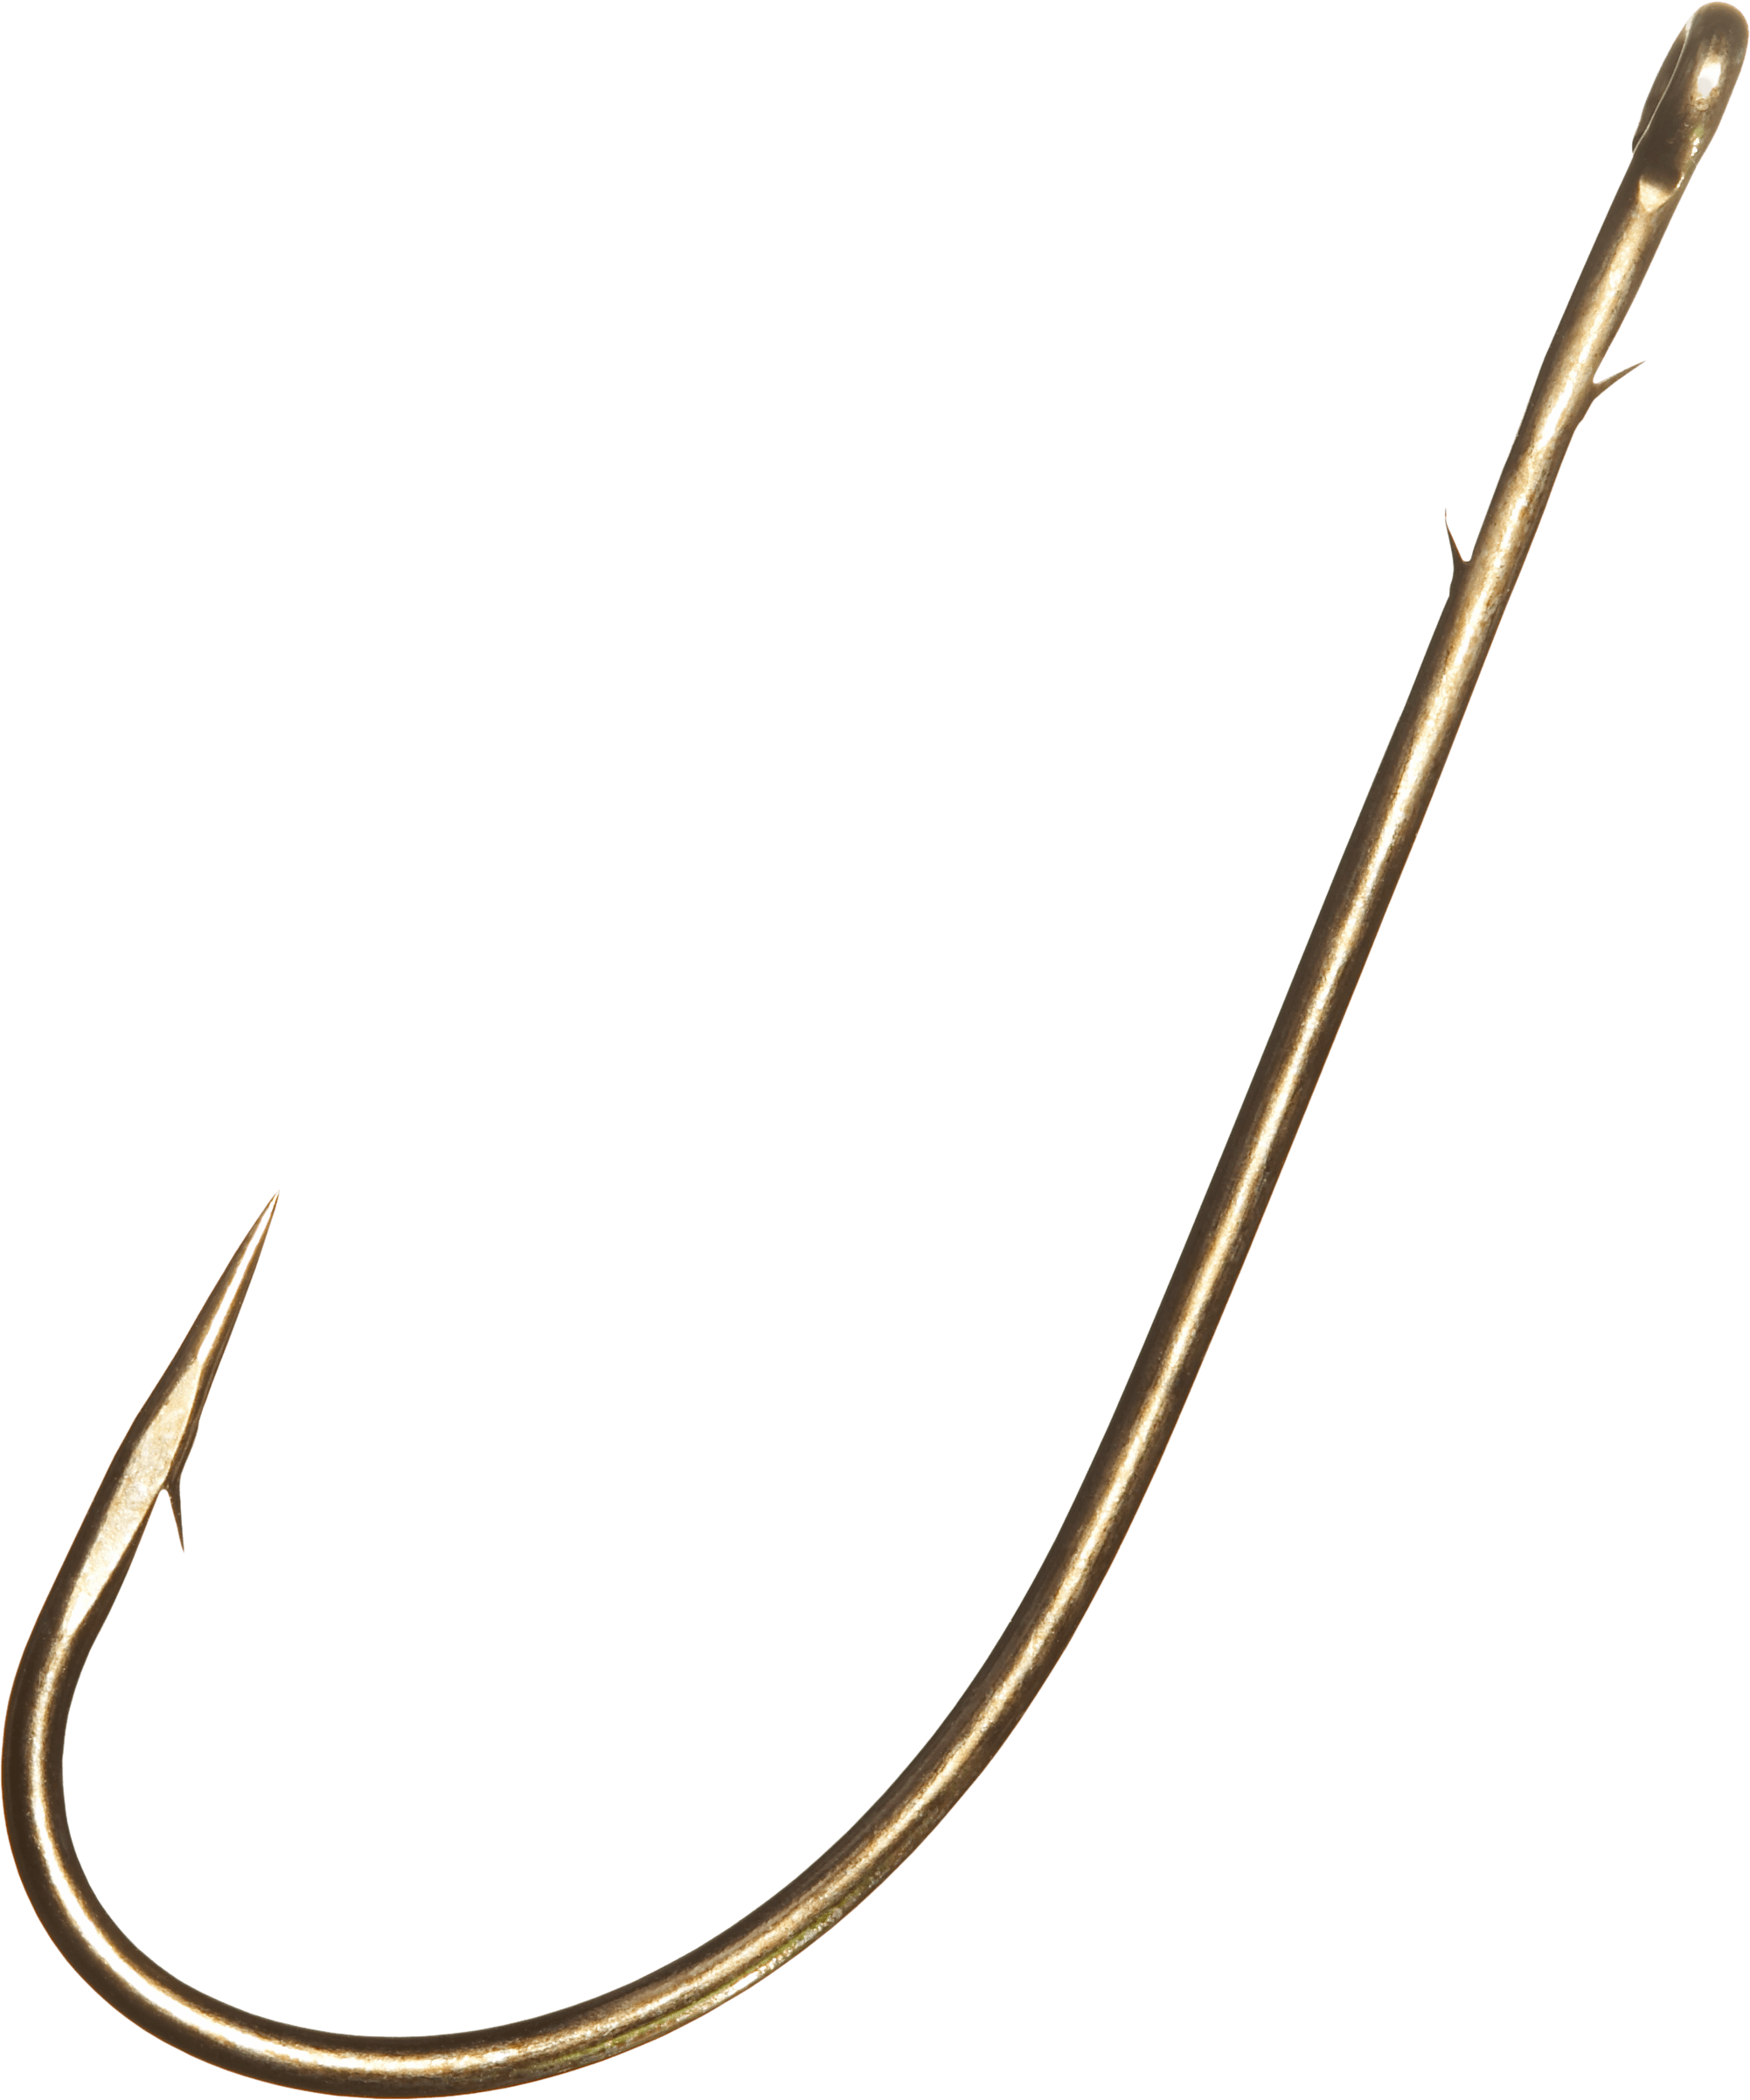 A Gold Fish Hook On A Black Background